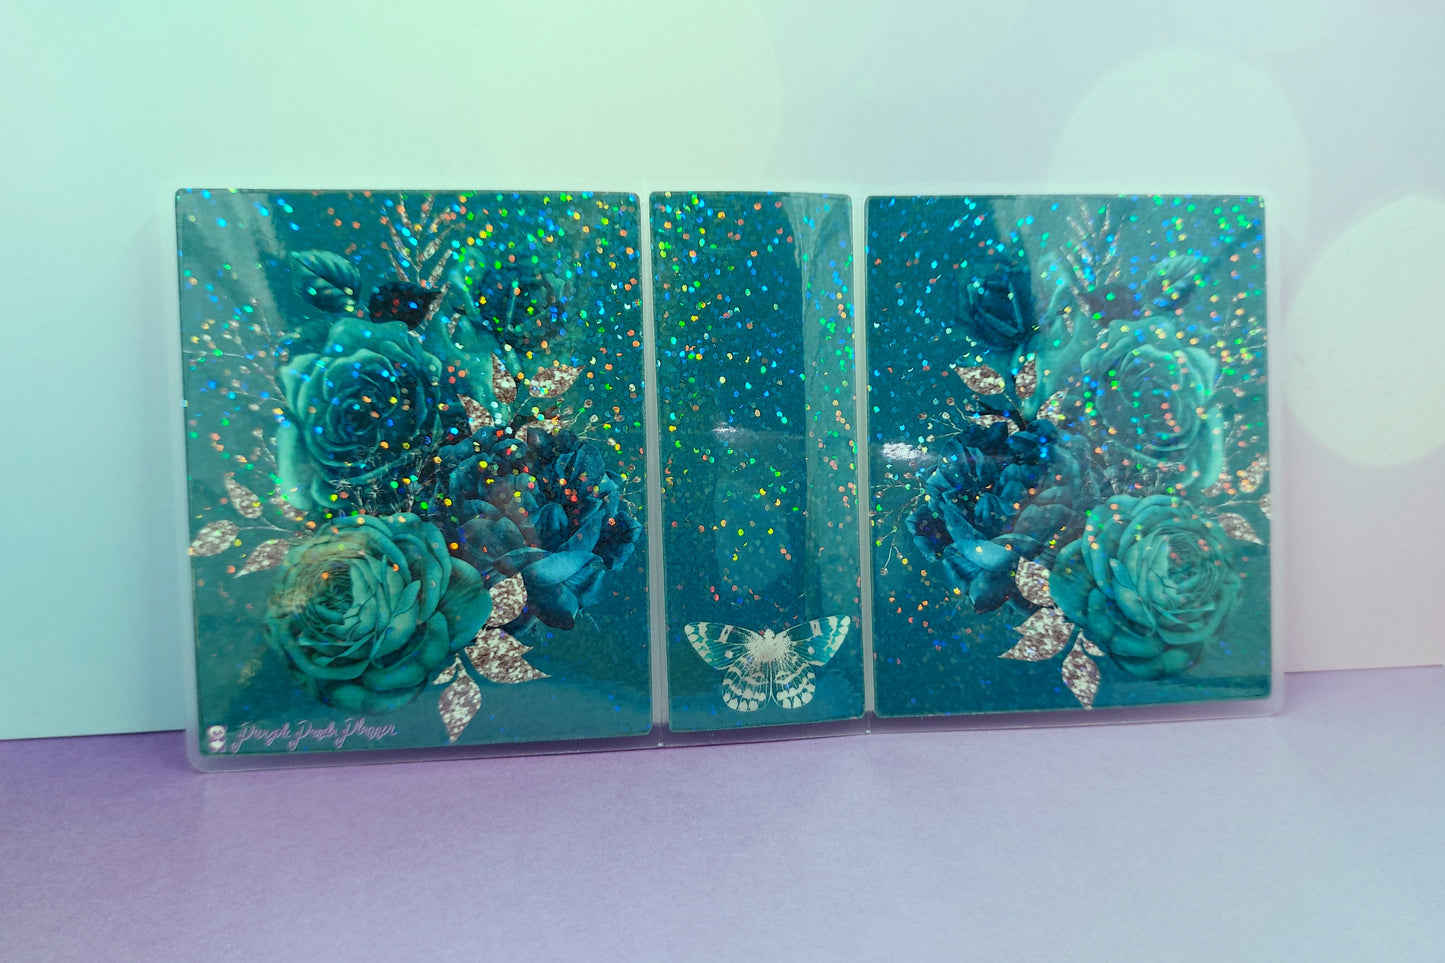 Medium Sticker Album (4.5" x 5.75") - Teal Floral Cover with Holo Laminate Overlay